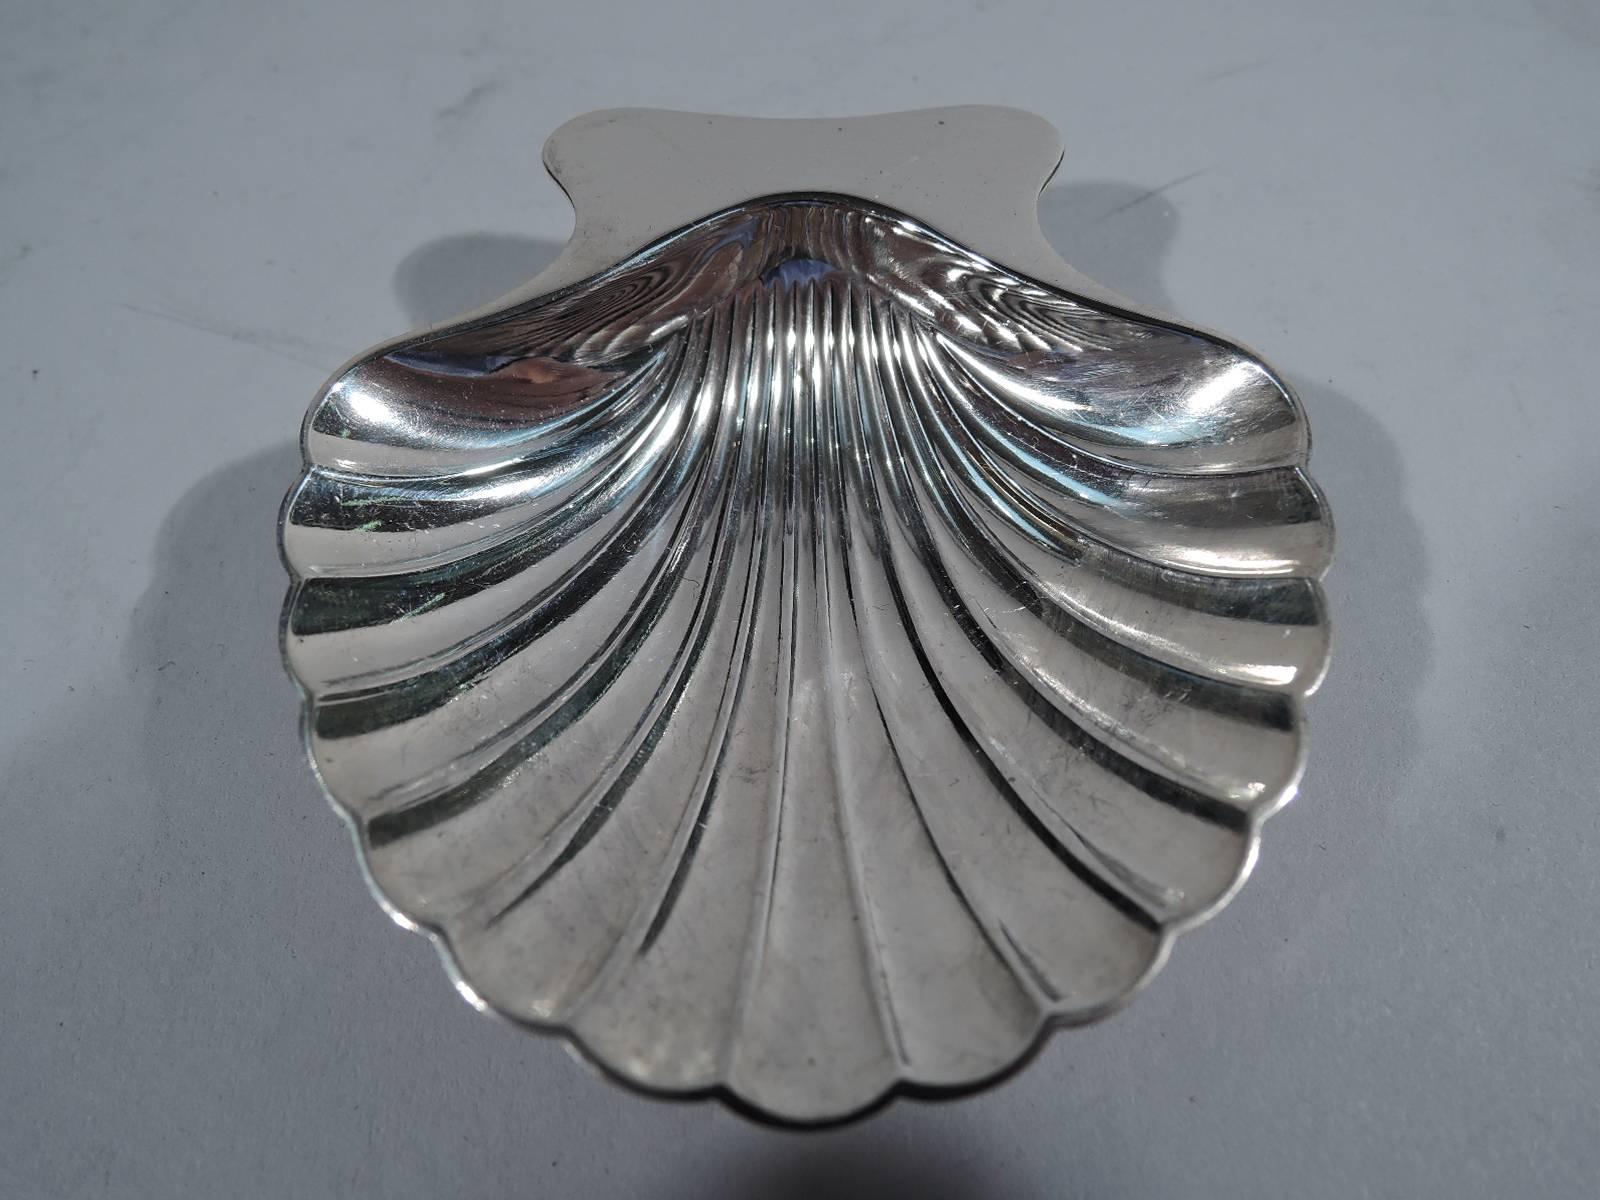 Set of ten sterling silver scallop shell nut dishes. Made by Tiffany & Co. in New York. Each: Dense flutes and plain handle. Rests on two balls. The pattern (no. 22479) was first produced in 1937. Hallmarked. Three shells have director’s letter m